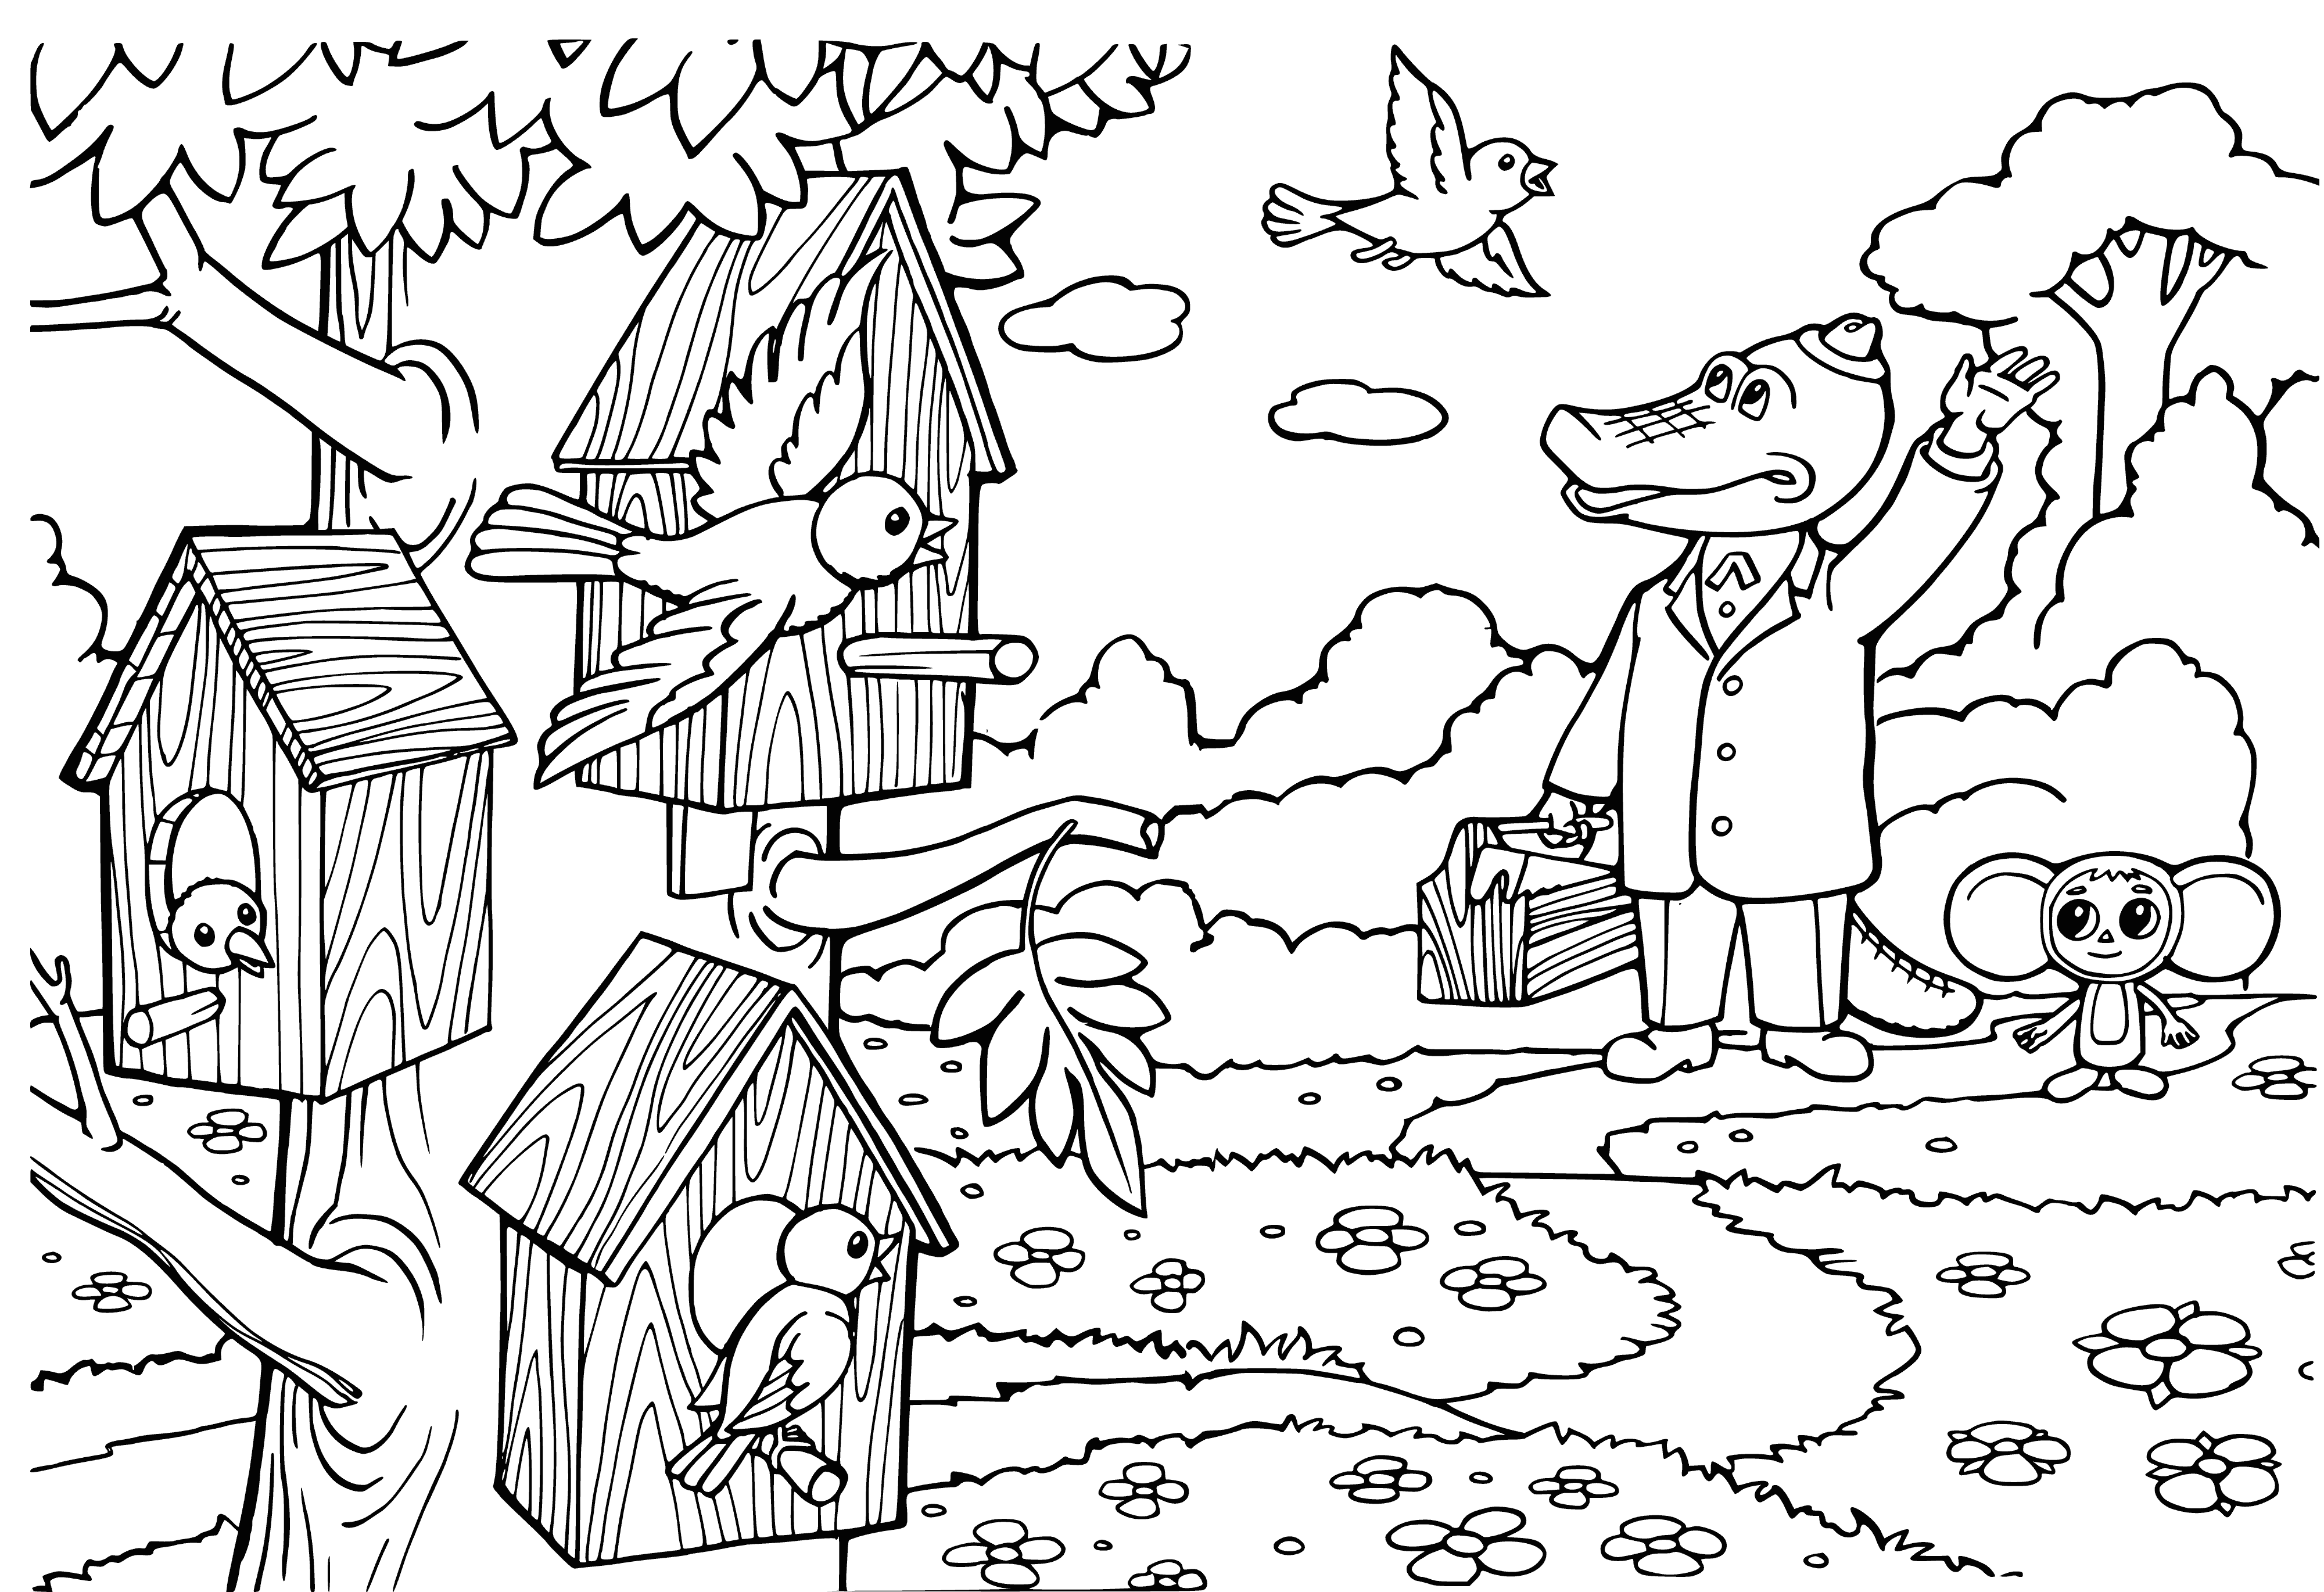 coloring page: 3 assorted colored houses w/ diverse creatures atop each. Every creature unique-looking; sky in bg.